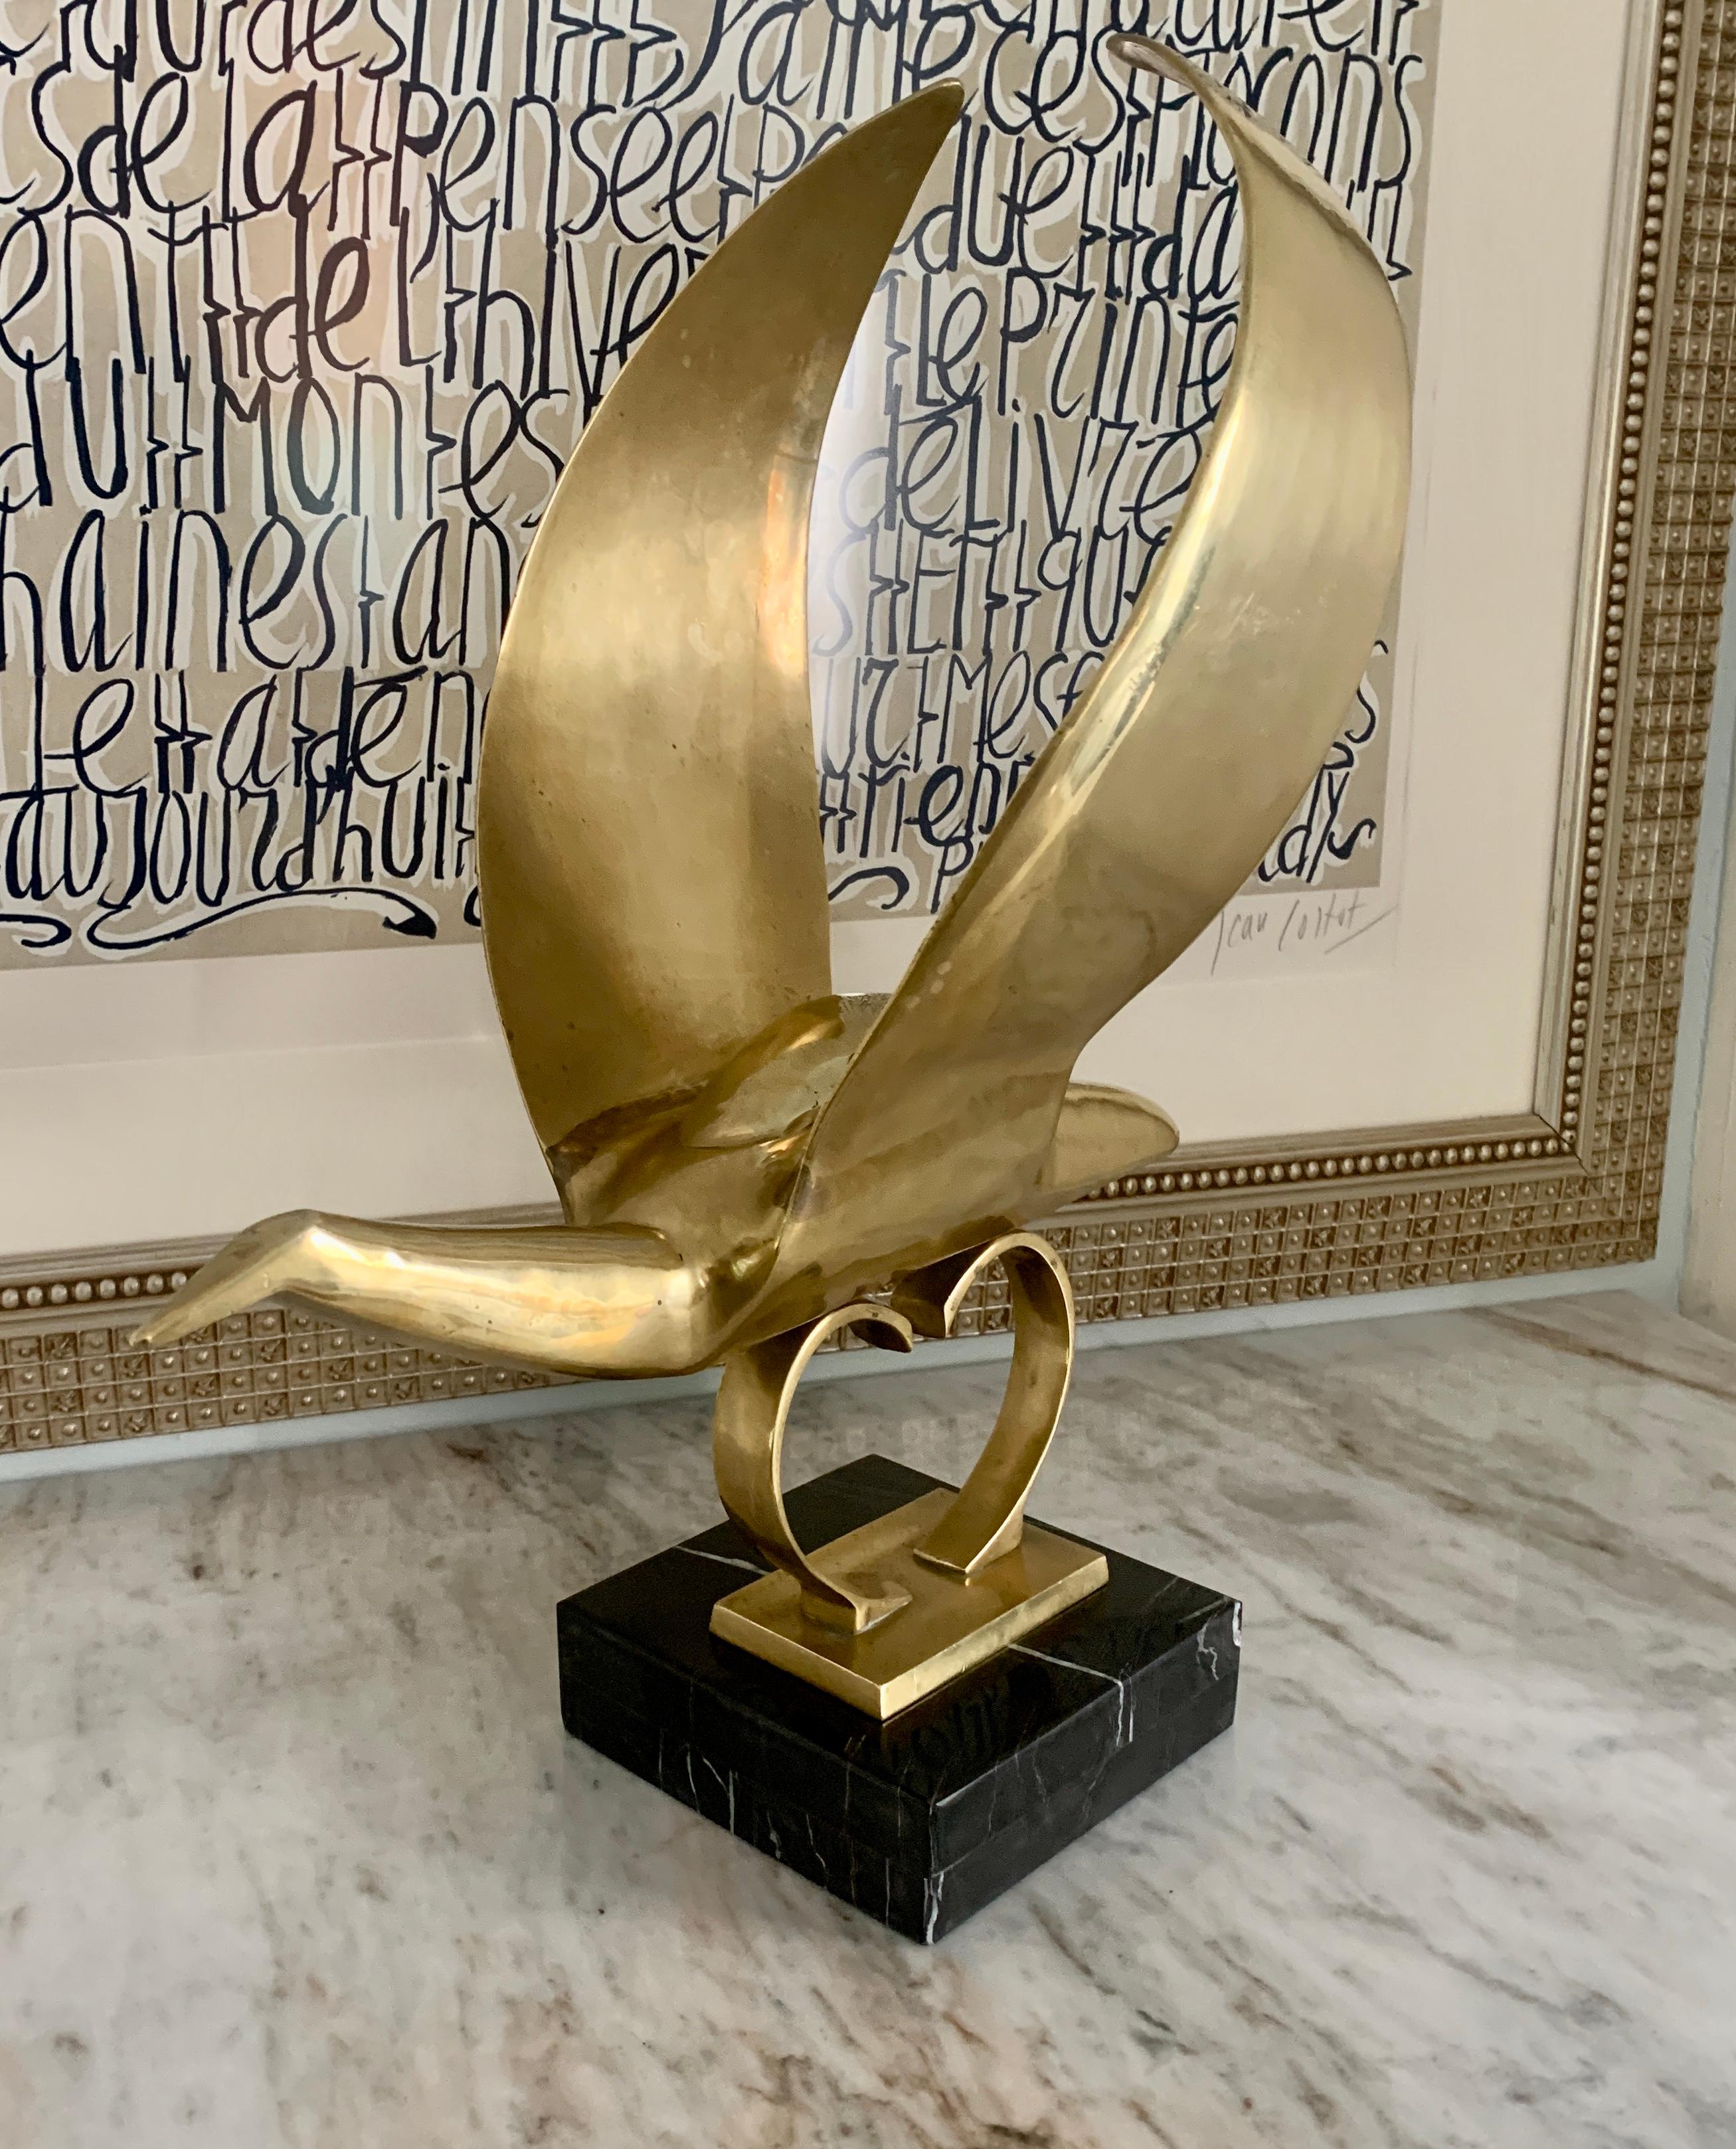 A large and impressive modern sculpture of a bird mounted on a custom marble base. We believe this piece to have been a hood ornament or architectural element. We have polished and mounted the bird on a black marble base. Impressive and of good